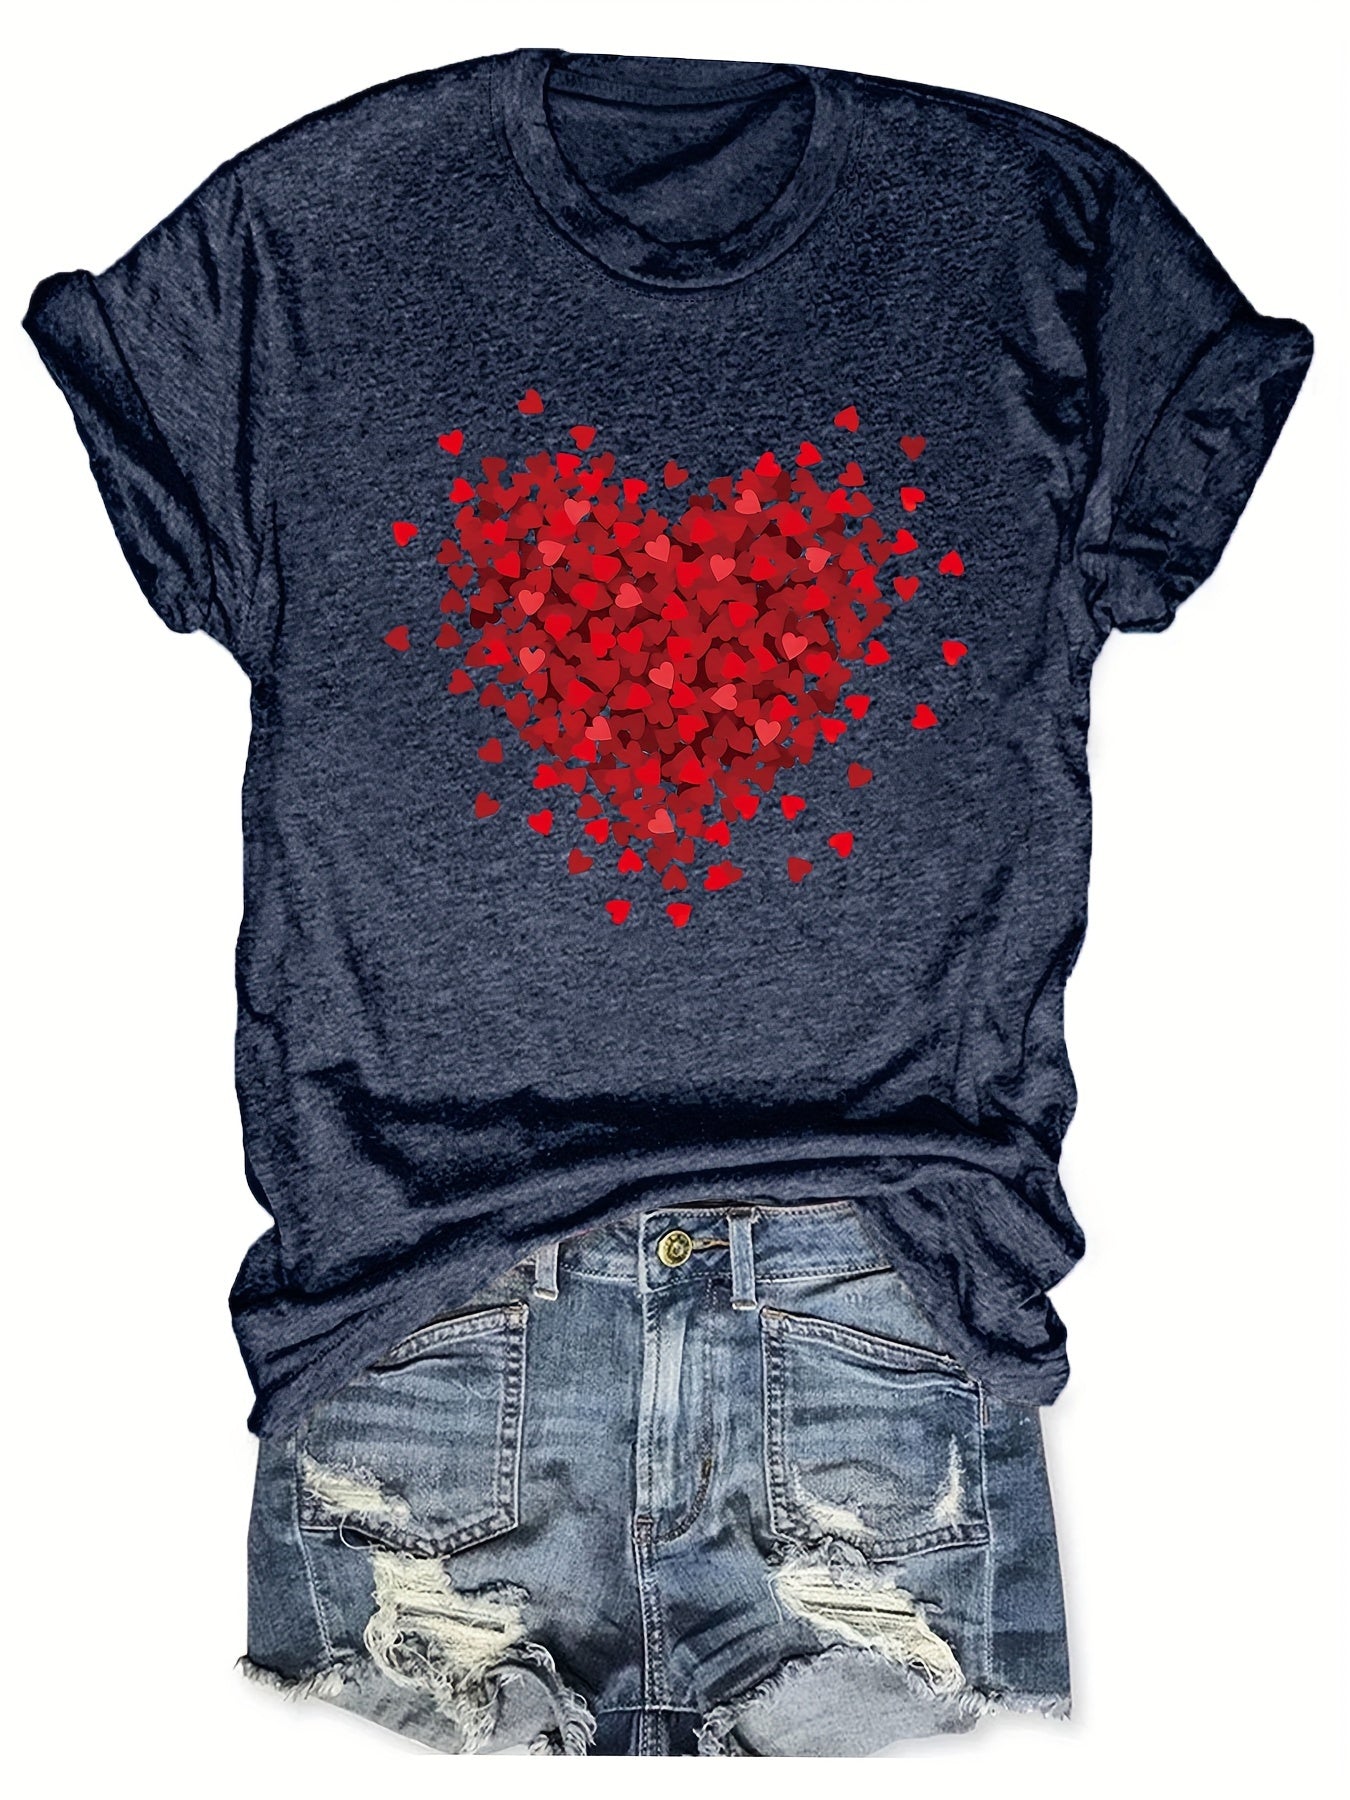 Valentine's Day Heart Print T-Shirt, Casual Crew Neck Short Sleeve Top For Spring & Summer, Women's Clothing